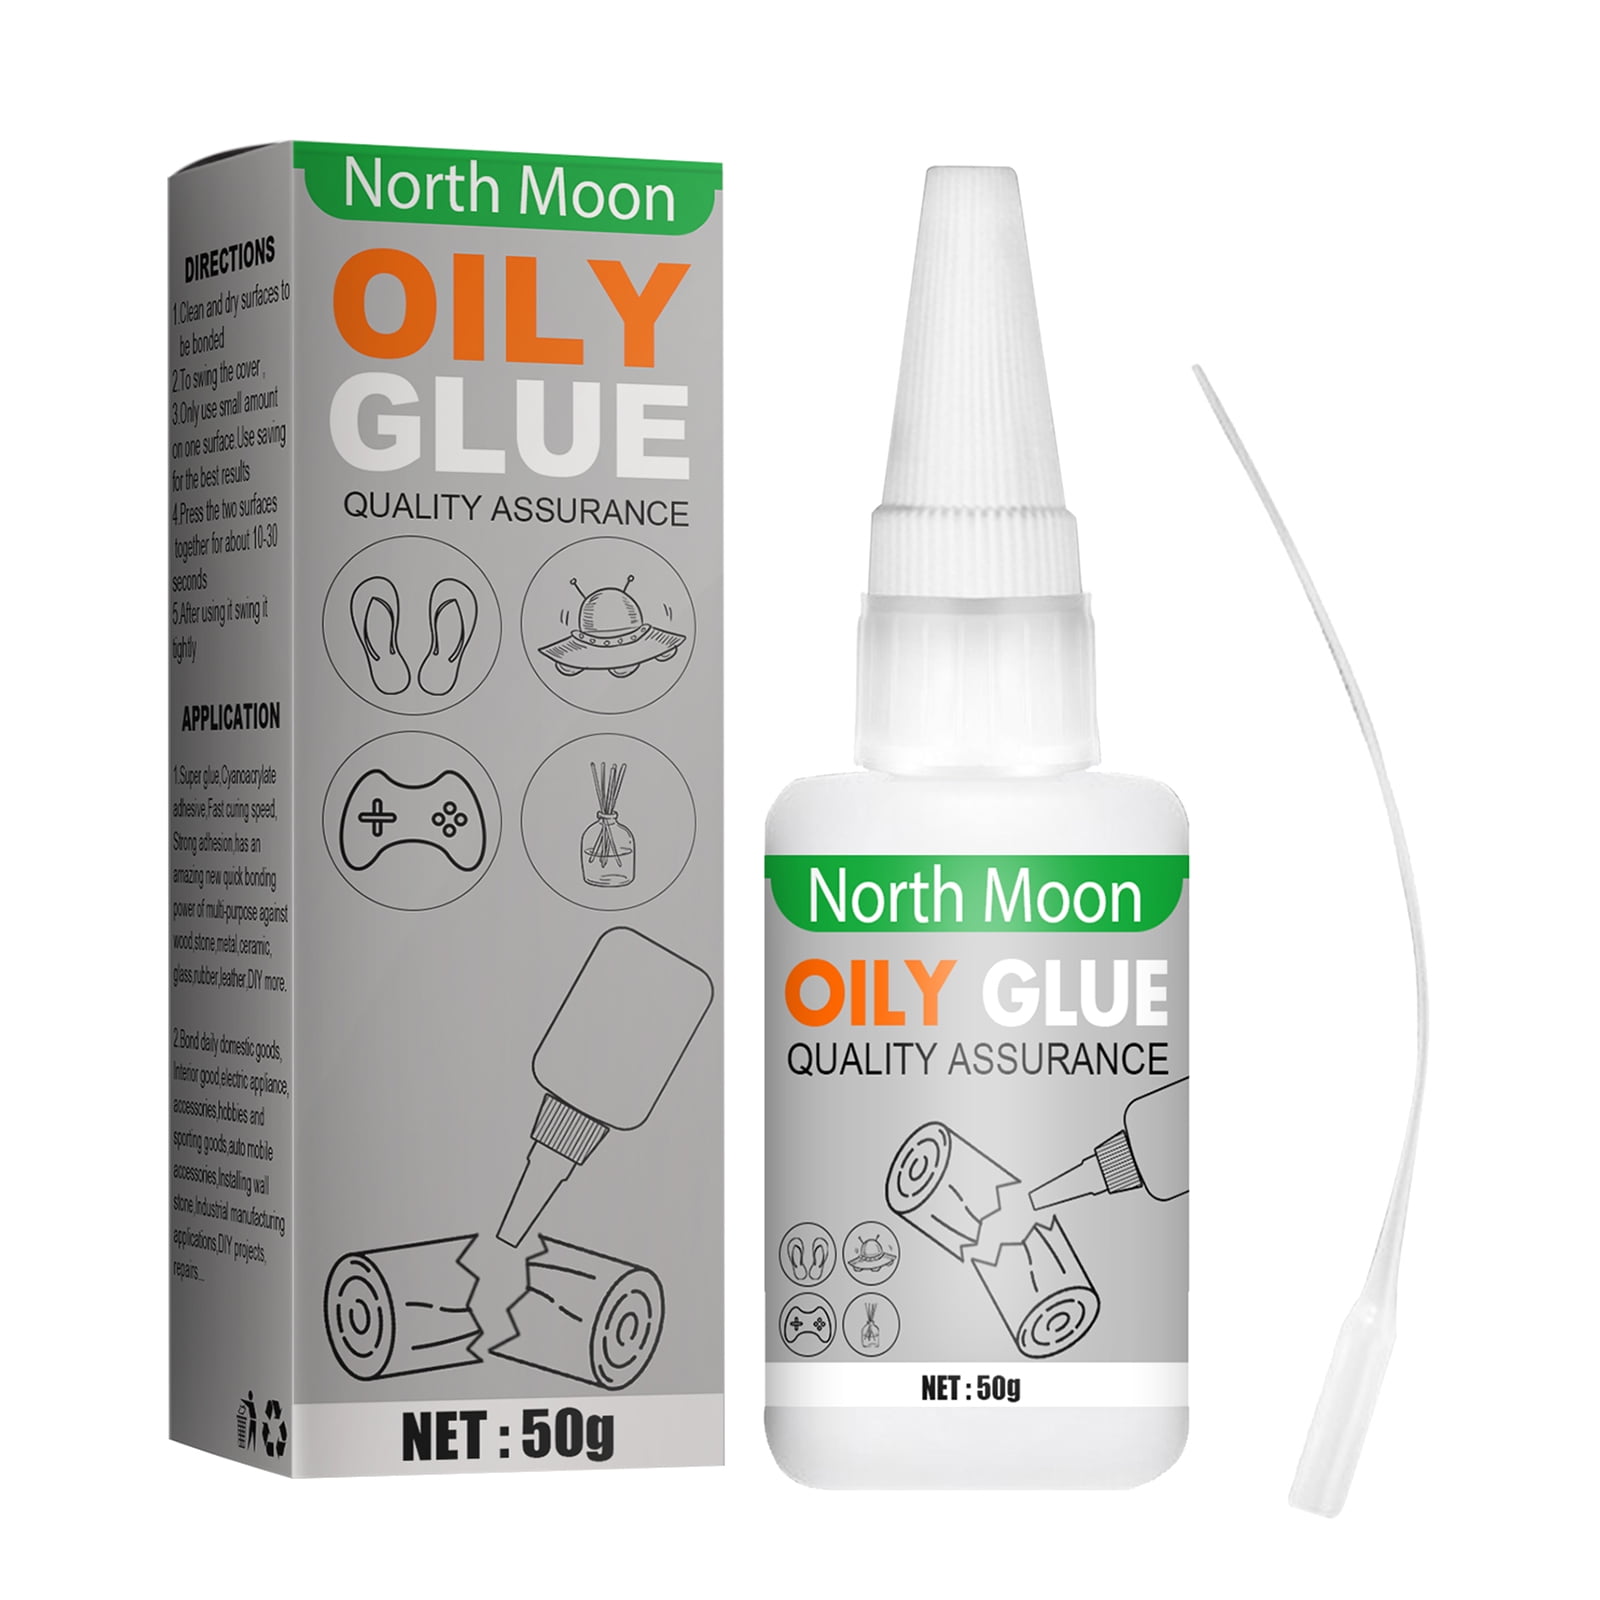 20g Metal Glue,Glue for Metal,for Bonding Between Metal and Metal,Metal and Other Material.Instant Super Glue for Metal,Stainless Steel,DIY Craft